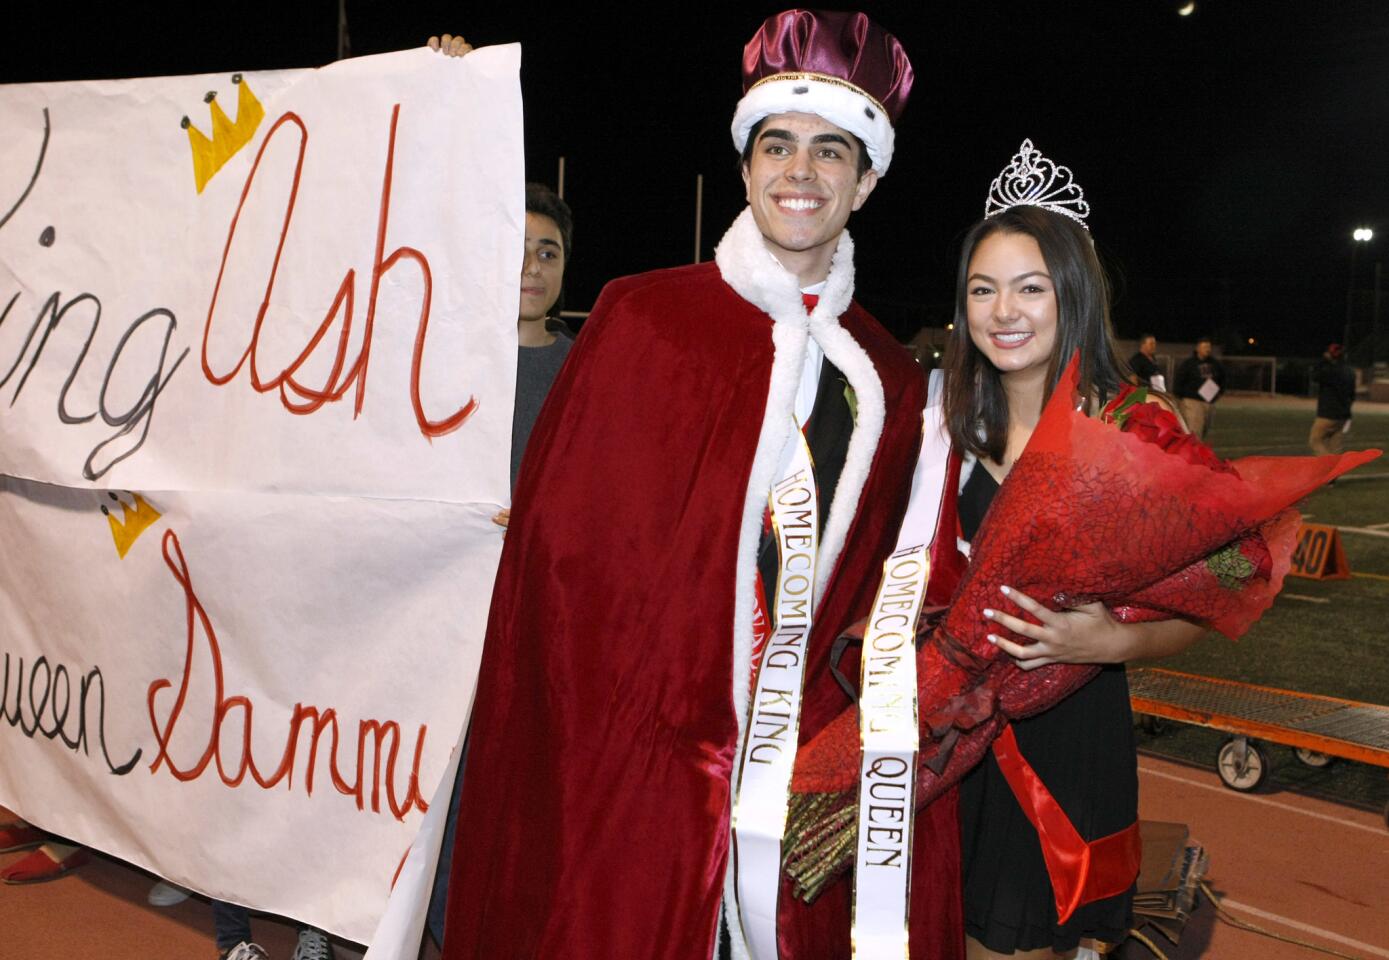 Glendale High School homecoming king was Ash Amroyan and the queen was Sammy Fabian, selected at half time of home game at the Glendale school on Friday, Nov. 4, 2016.